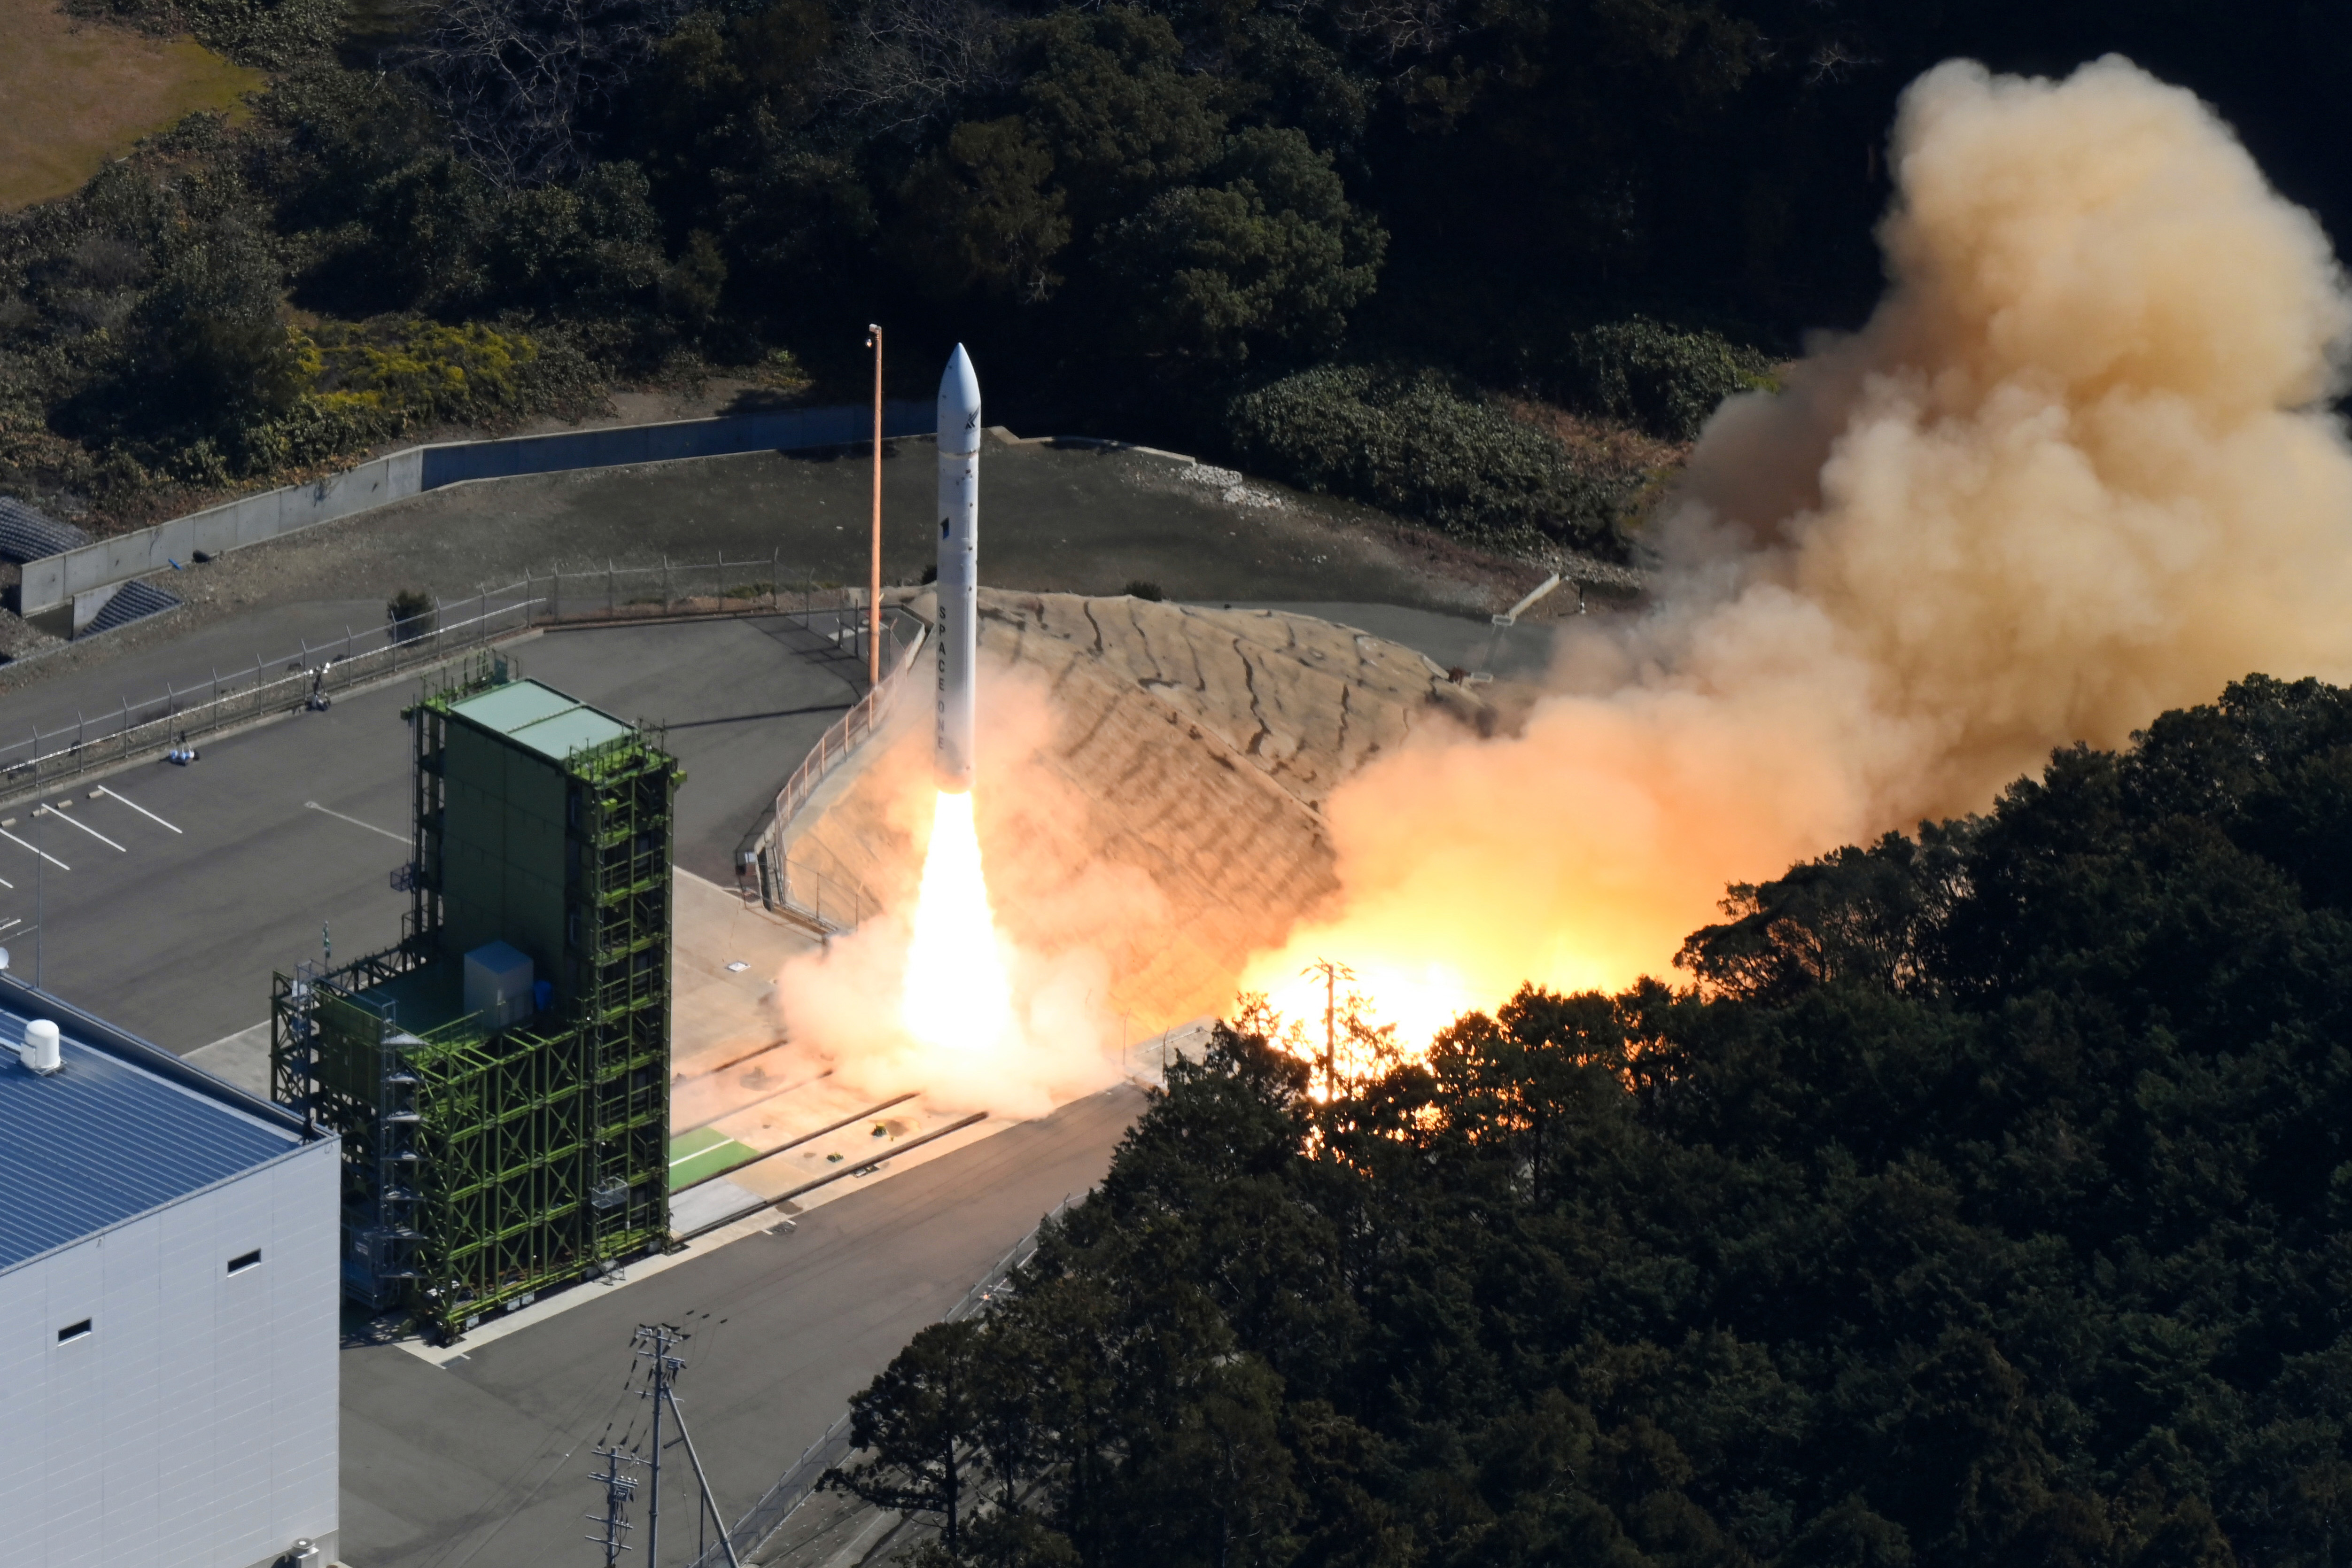 Space One's Kairos rocket failed just moments into the launch